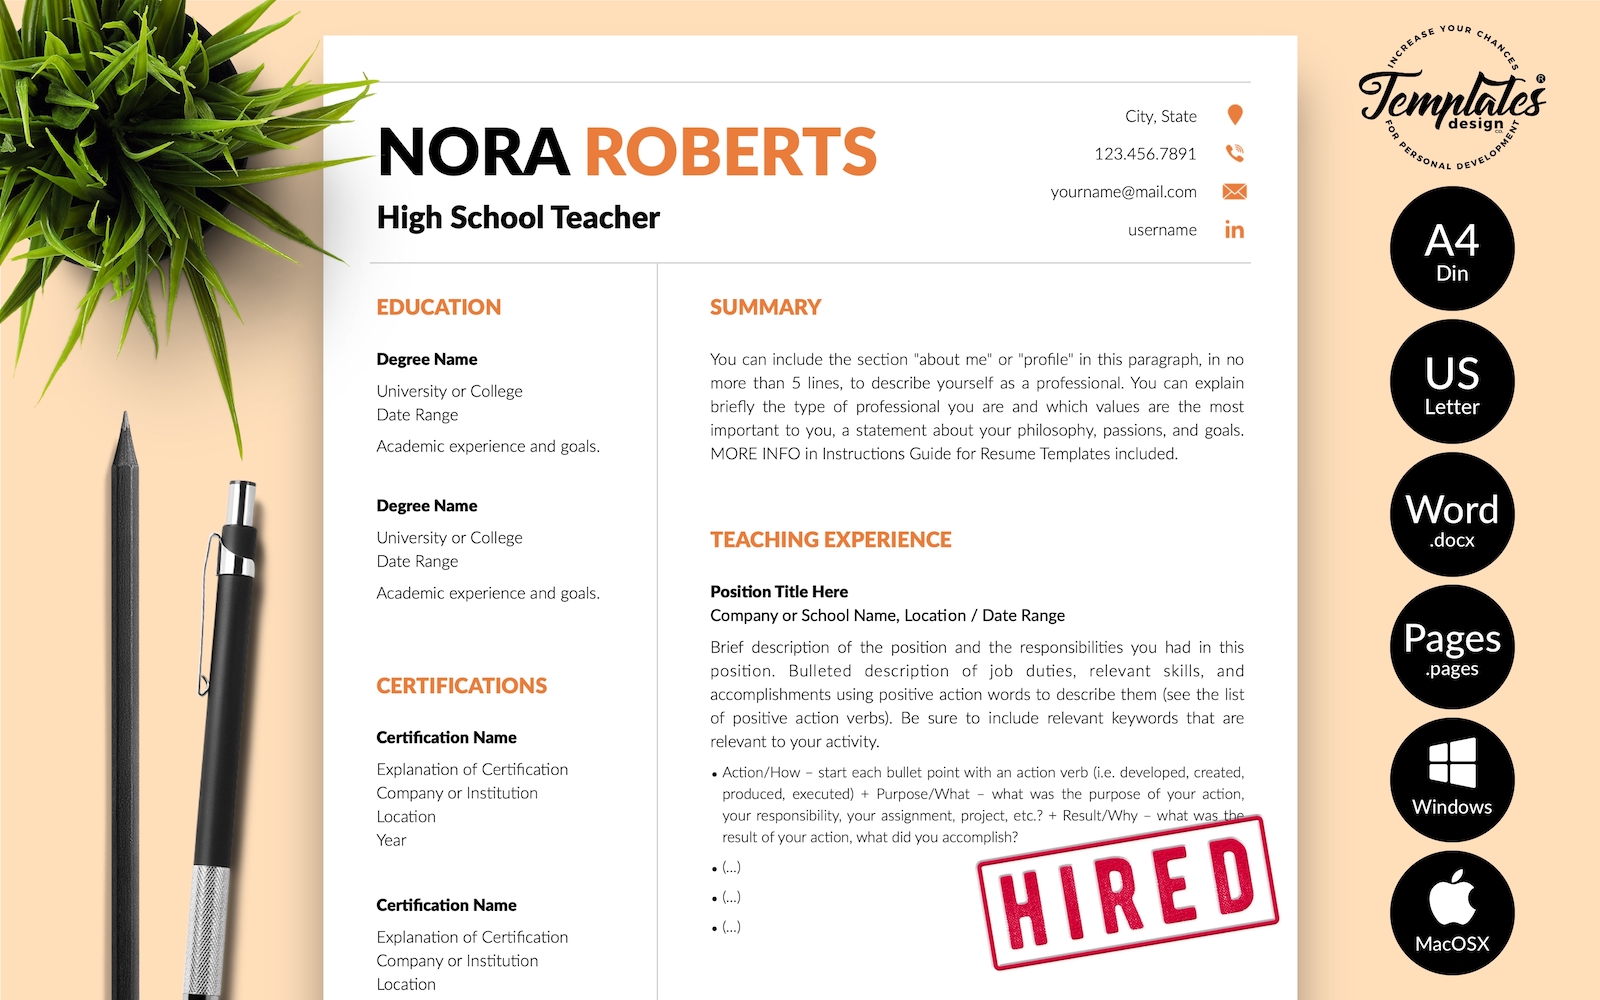 Nora Roberts - Teacher CV Resume Template with Cover Letter for Microsoft Word & iWork Pages